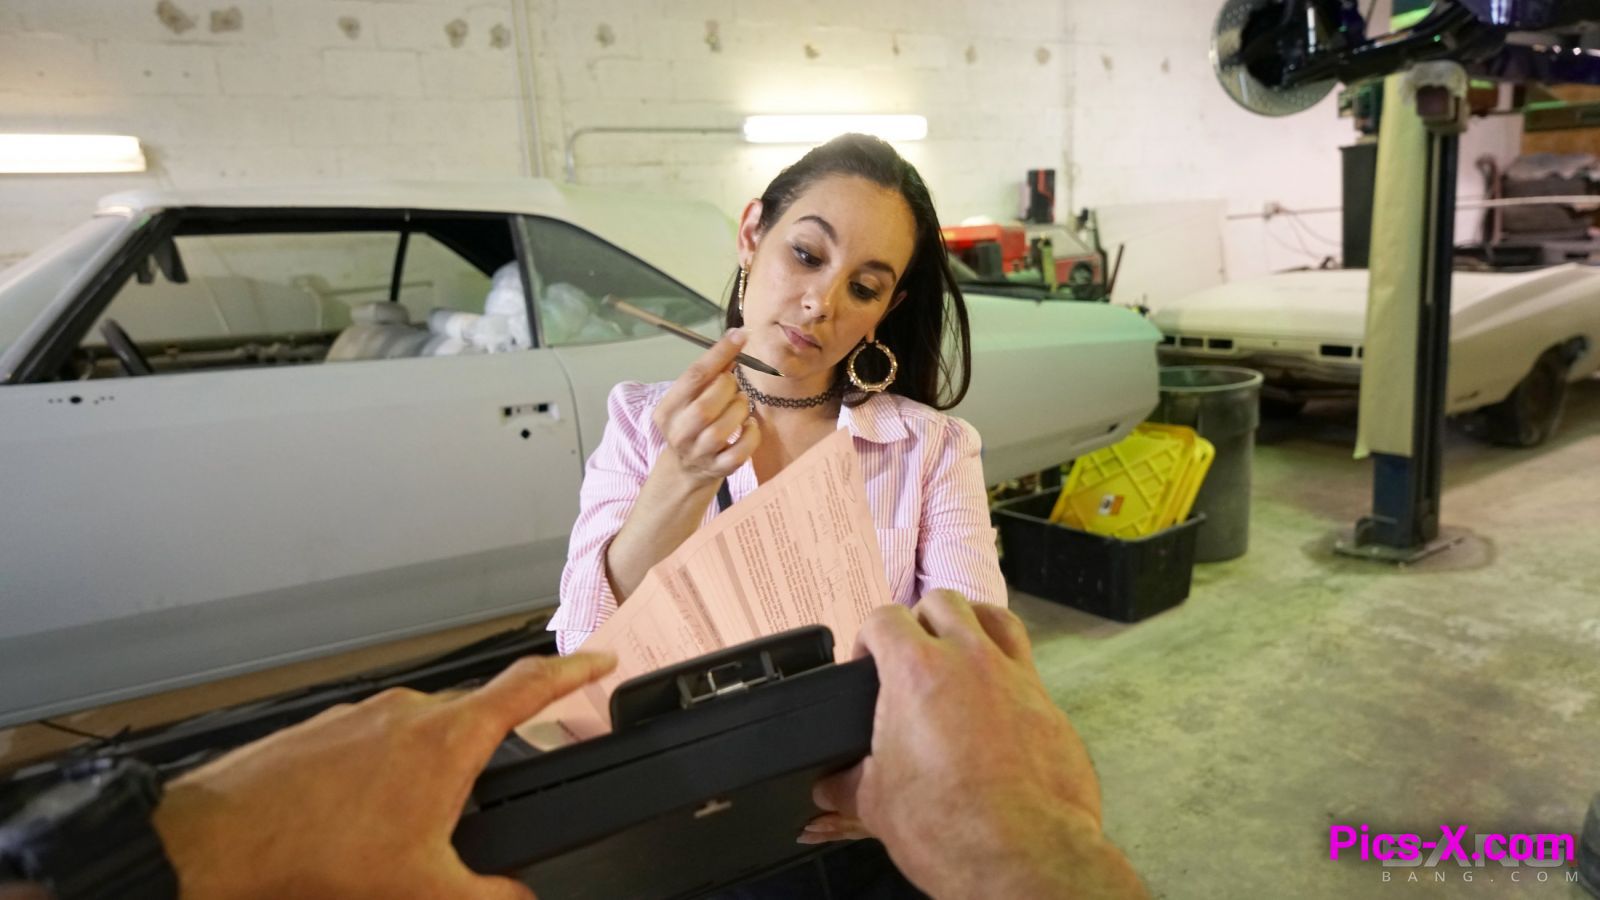 Alexandra's mechanic fucks the attitude right out of her - Image 18